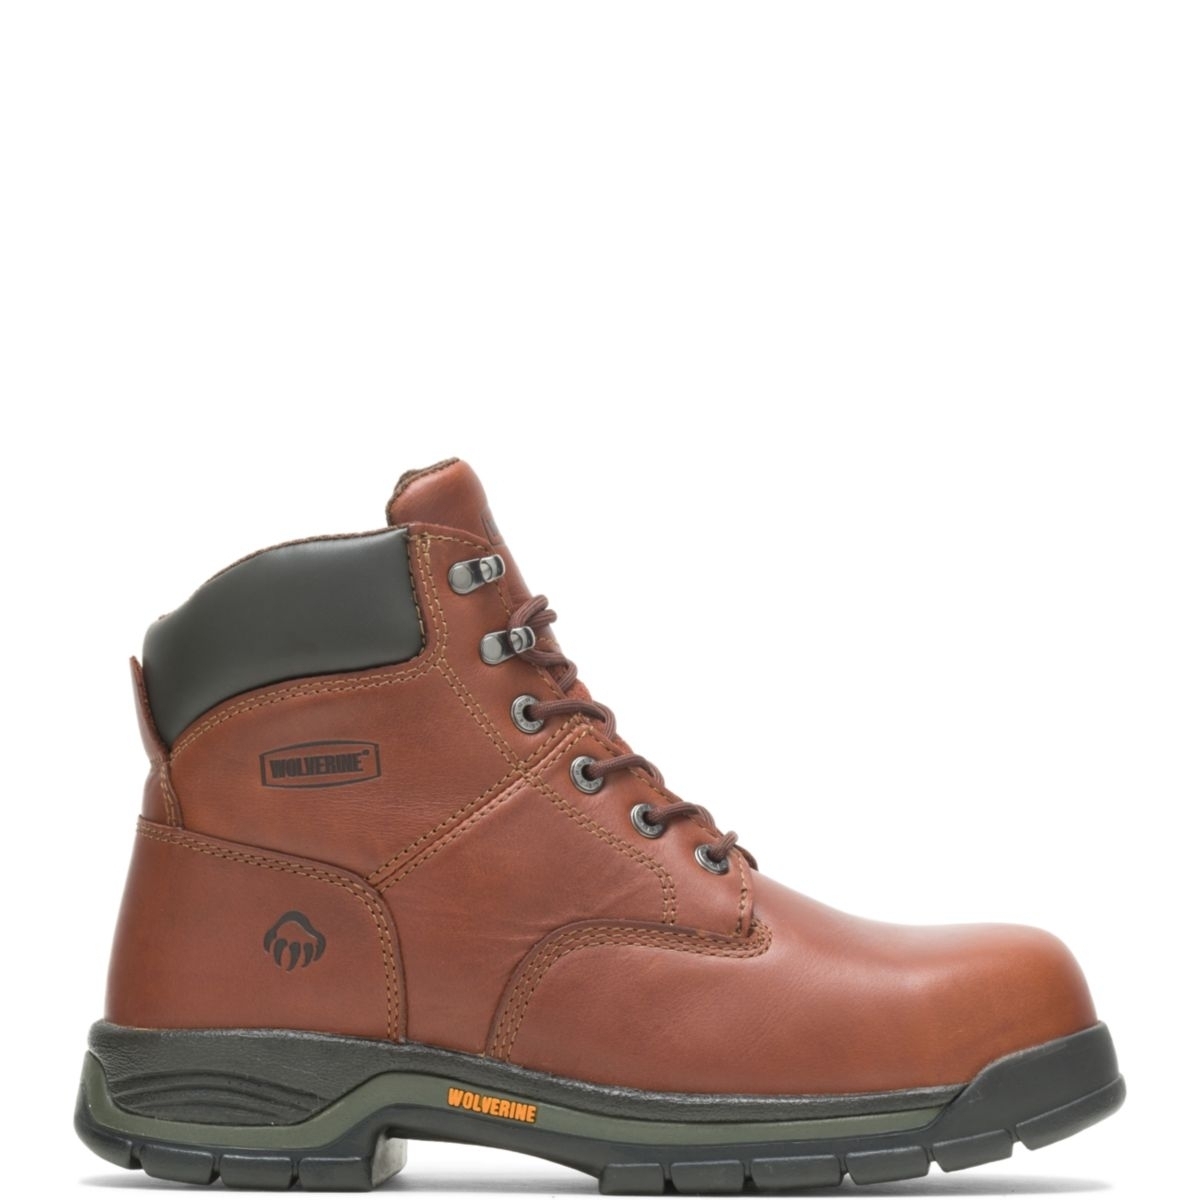 WOLVERINE Men's Harrison 6 Lace-Up Steel Toe Work Boot Brown - W04904 BROWN LEATHER - BROWN LEATHER, 11.5 X-Wide